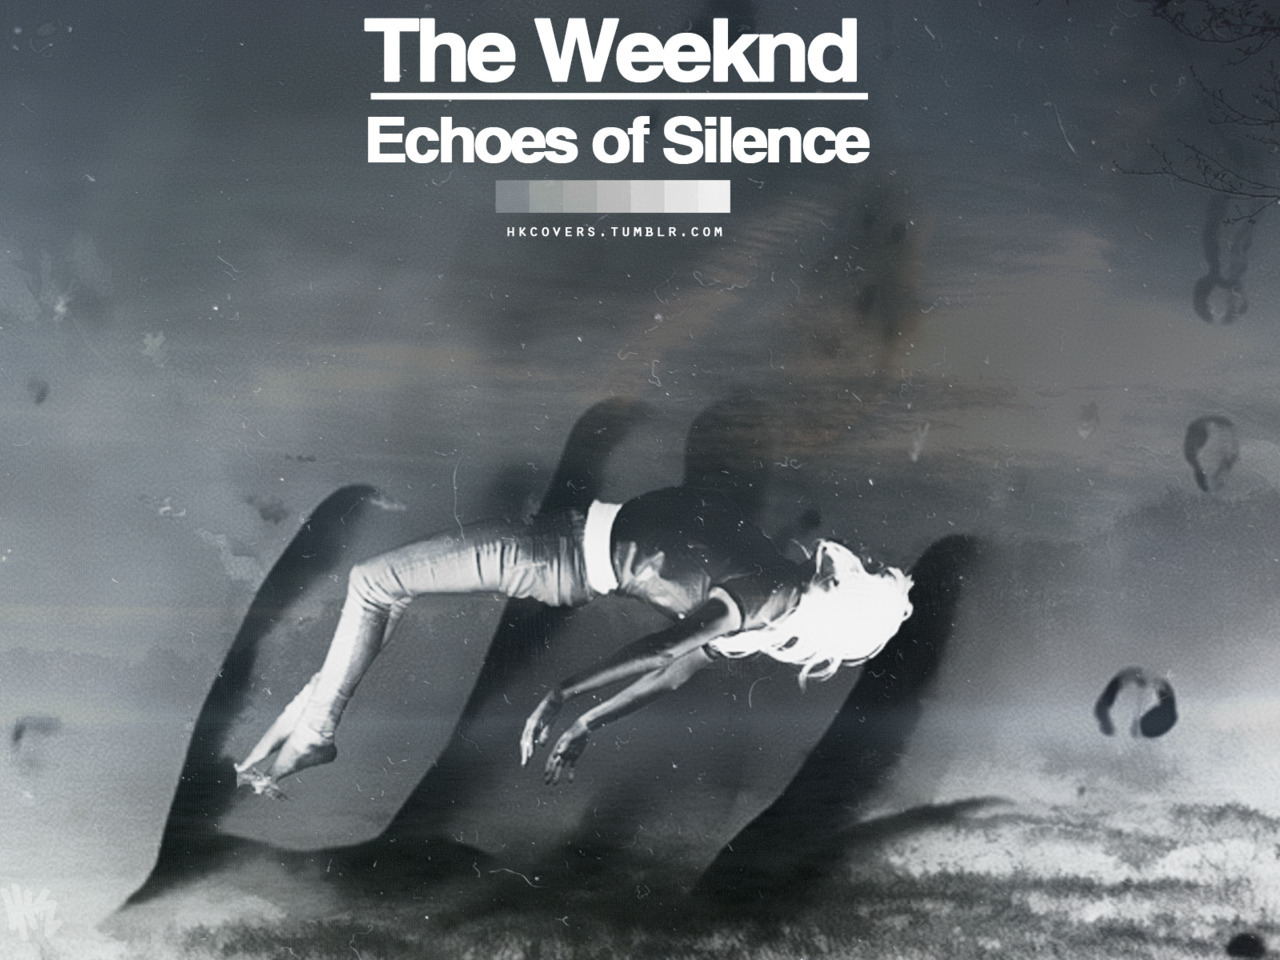 The Weeknd - Echoes Of Silence at Discogs